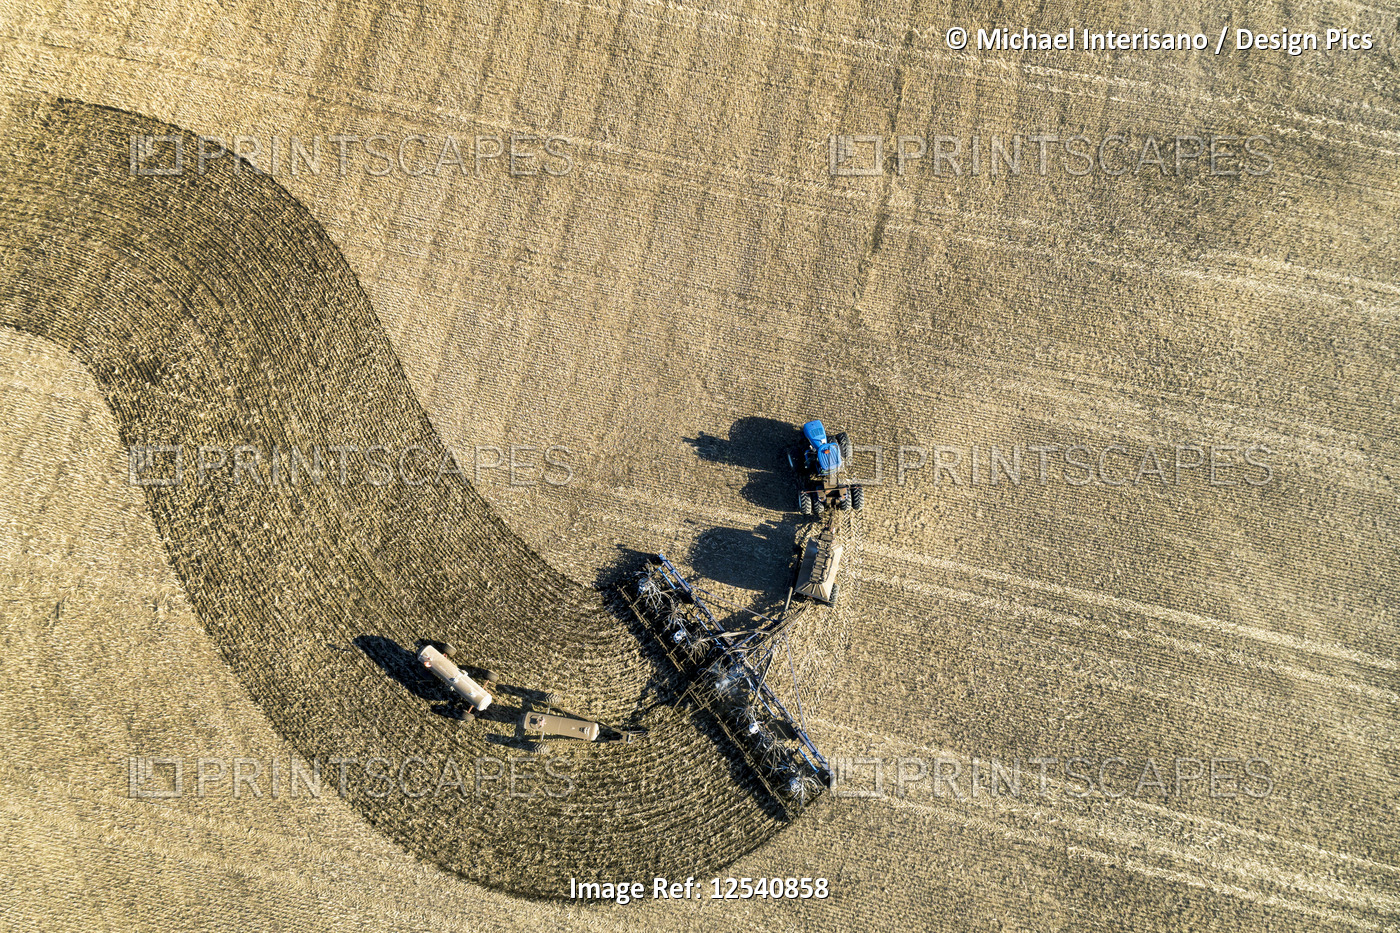 Aerial view of a tractor pulling an air seeder, seeding a field; Beiseker, ...